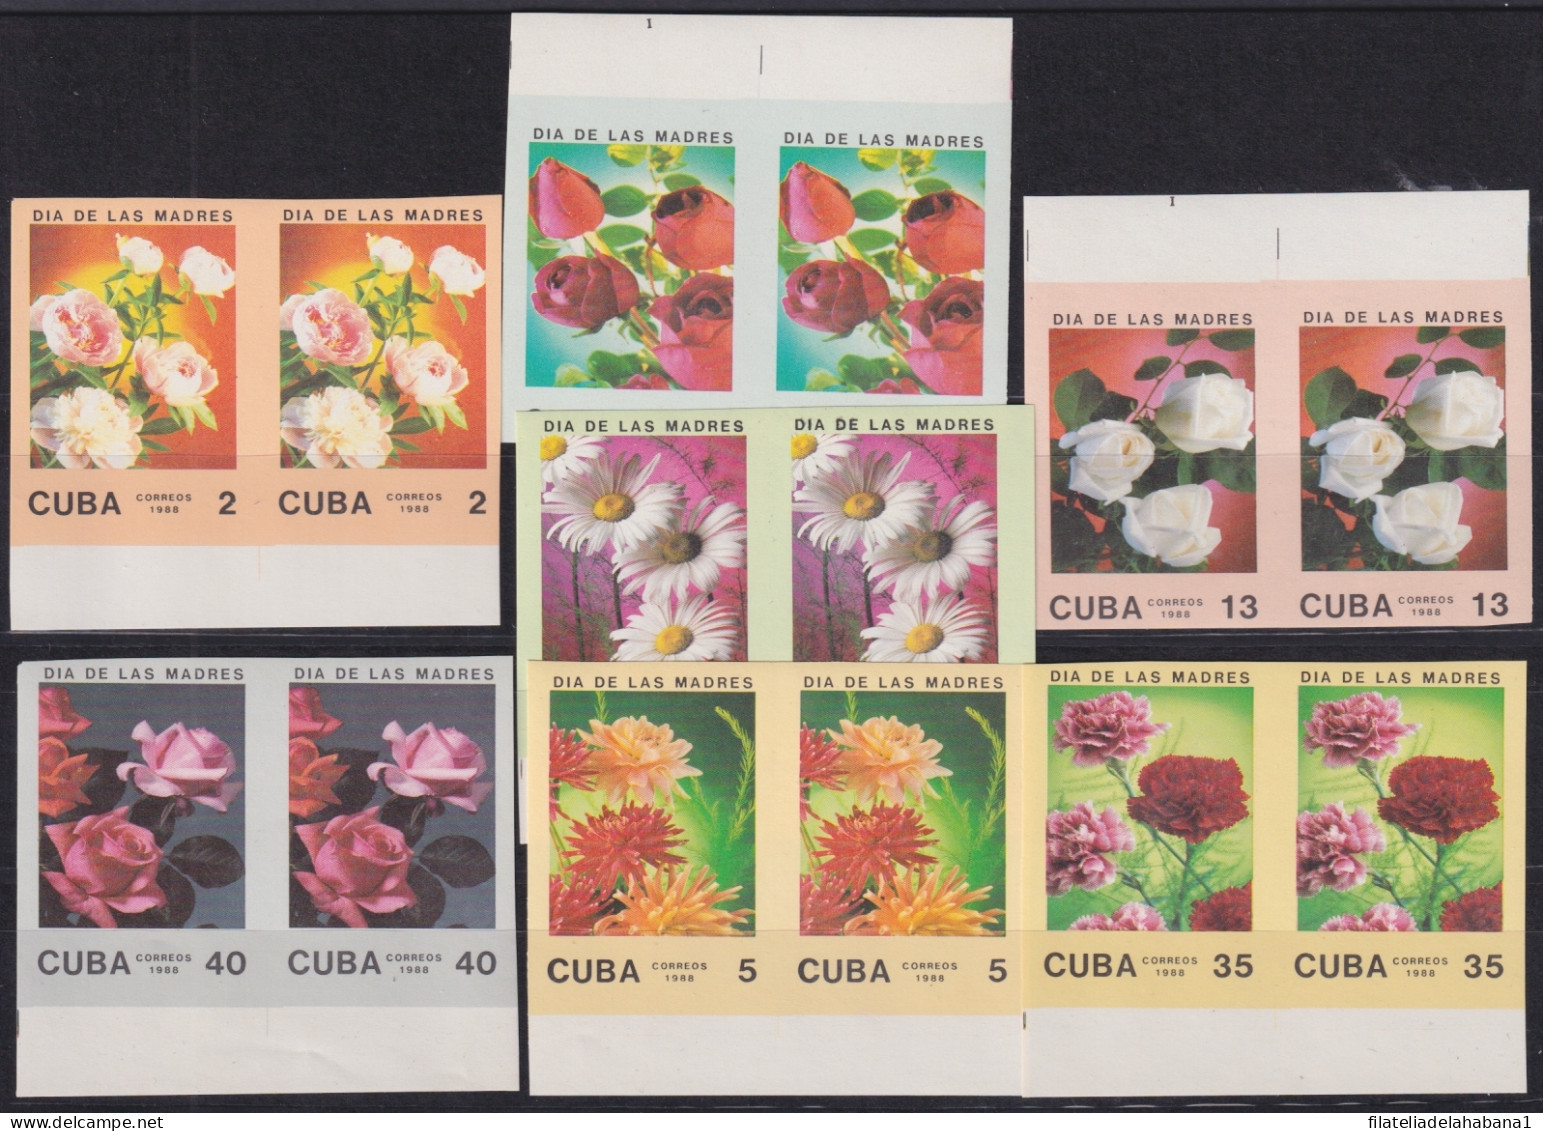 1988.135 CUBA MNH 1988 IMPERFORATED PROOF MOTHER DAY FLOWER FLORES PAIR.  - Imperforates, Proofs & Errors